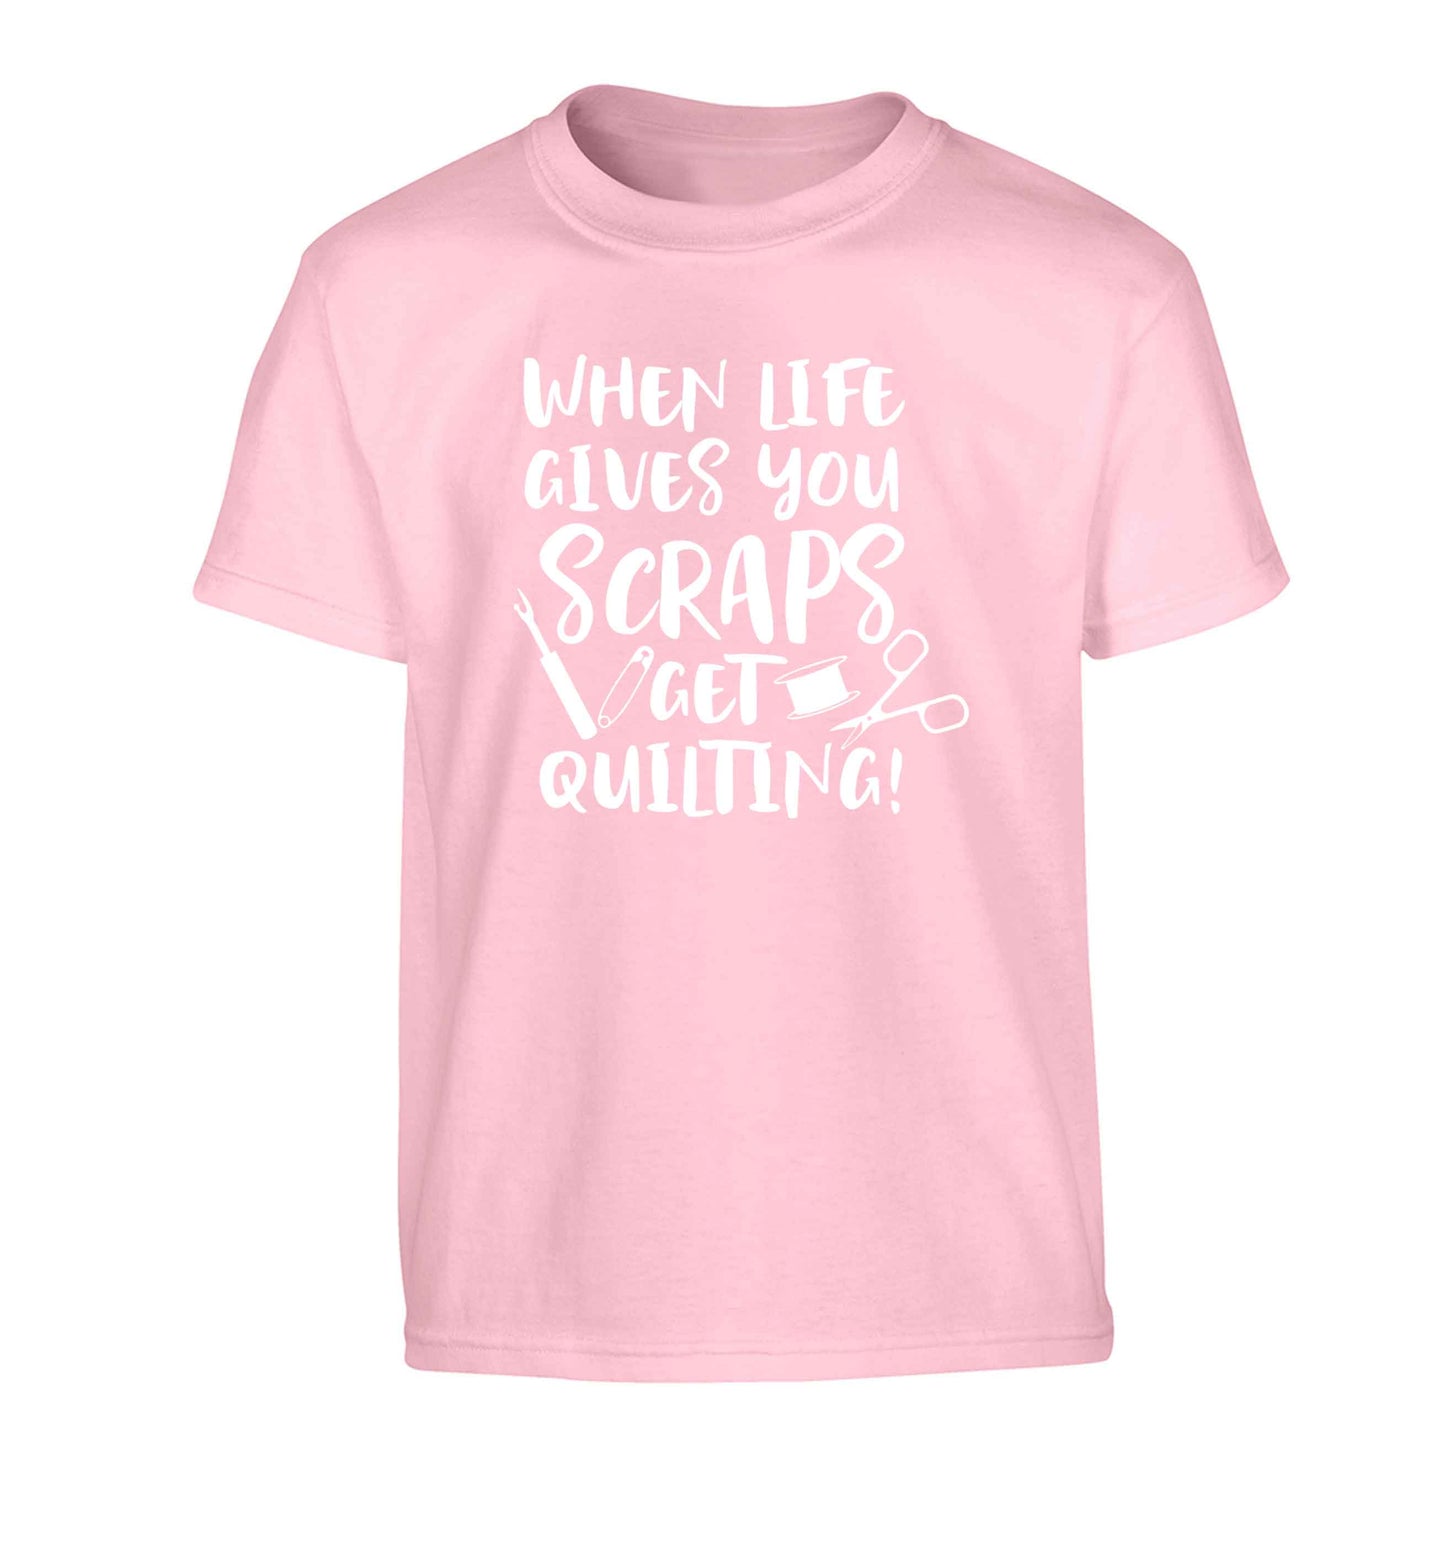 When life gives you scraps get quilting! Children's light pink Tshirt 12-13 Years